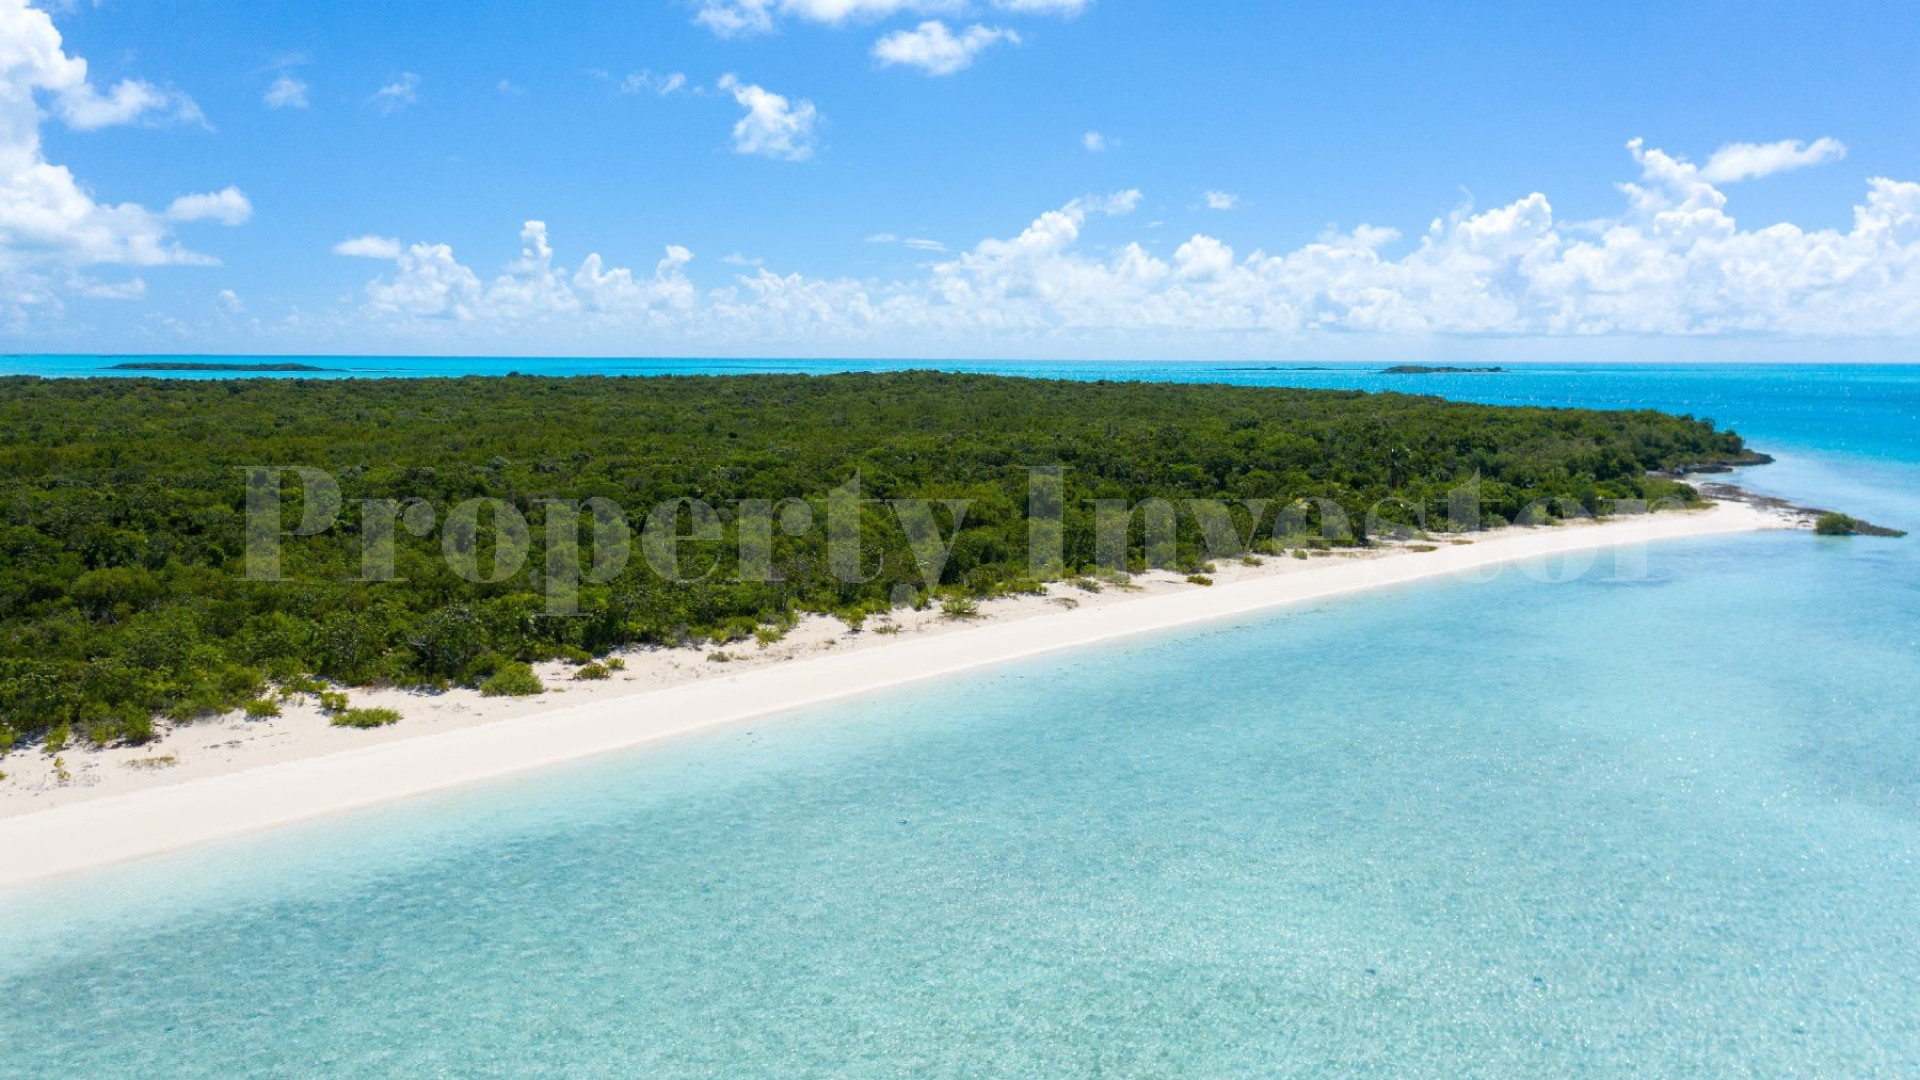 Self Sustainable 104 Hectare Private Island & Residence with Solar Array & Battery Backup for Sale in the Exuma Cays, the Bahamas